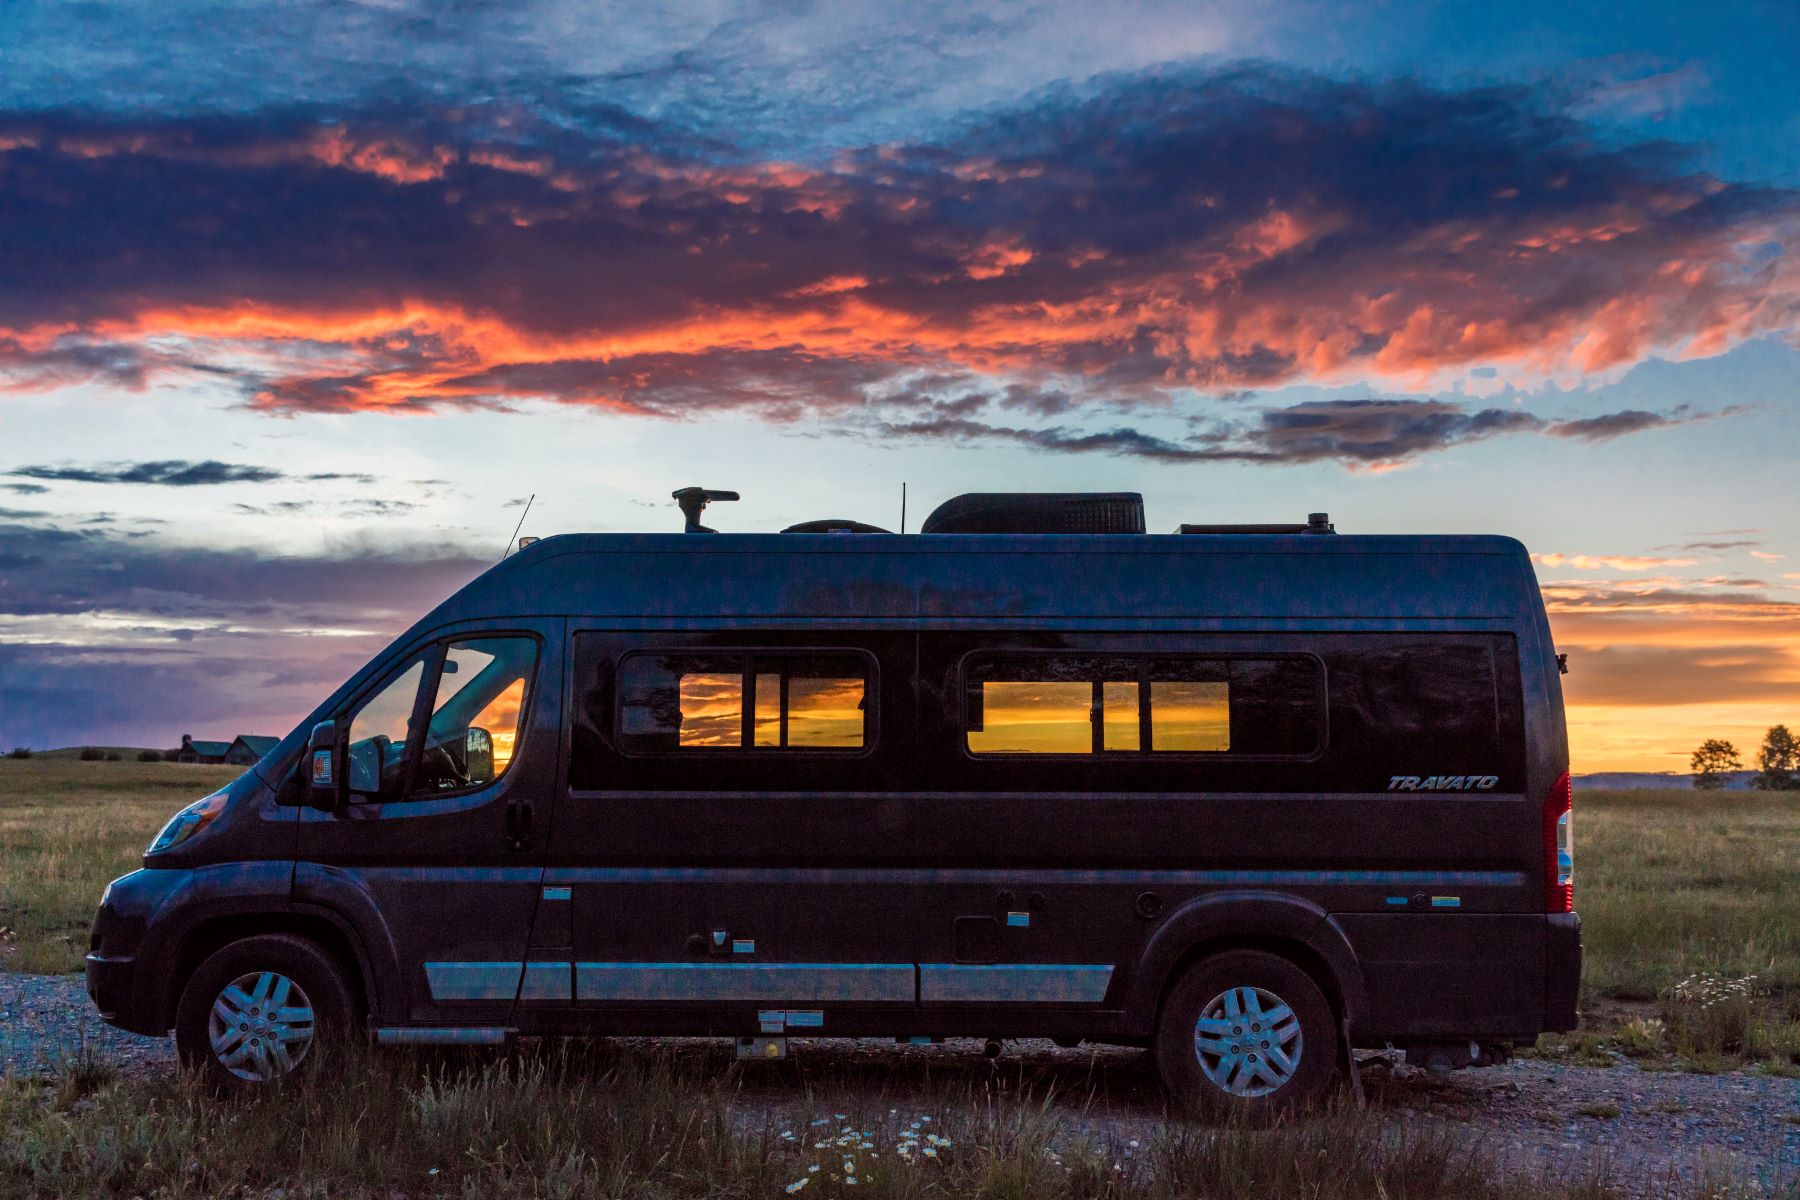 2017 Winnebago Travato camper parked outside during a colorful sunset